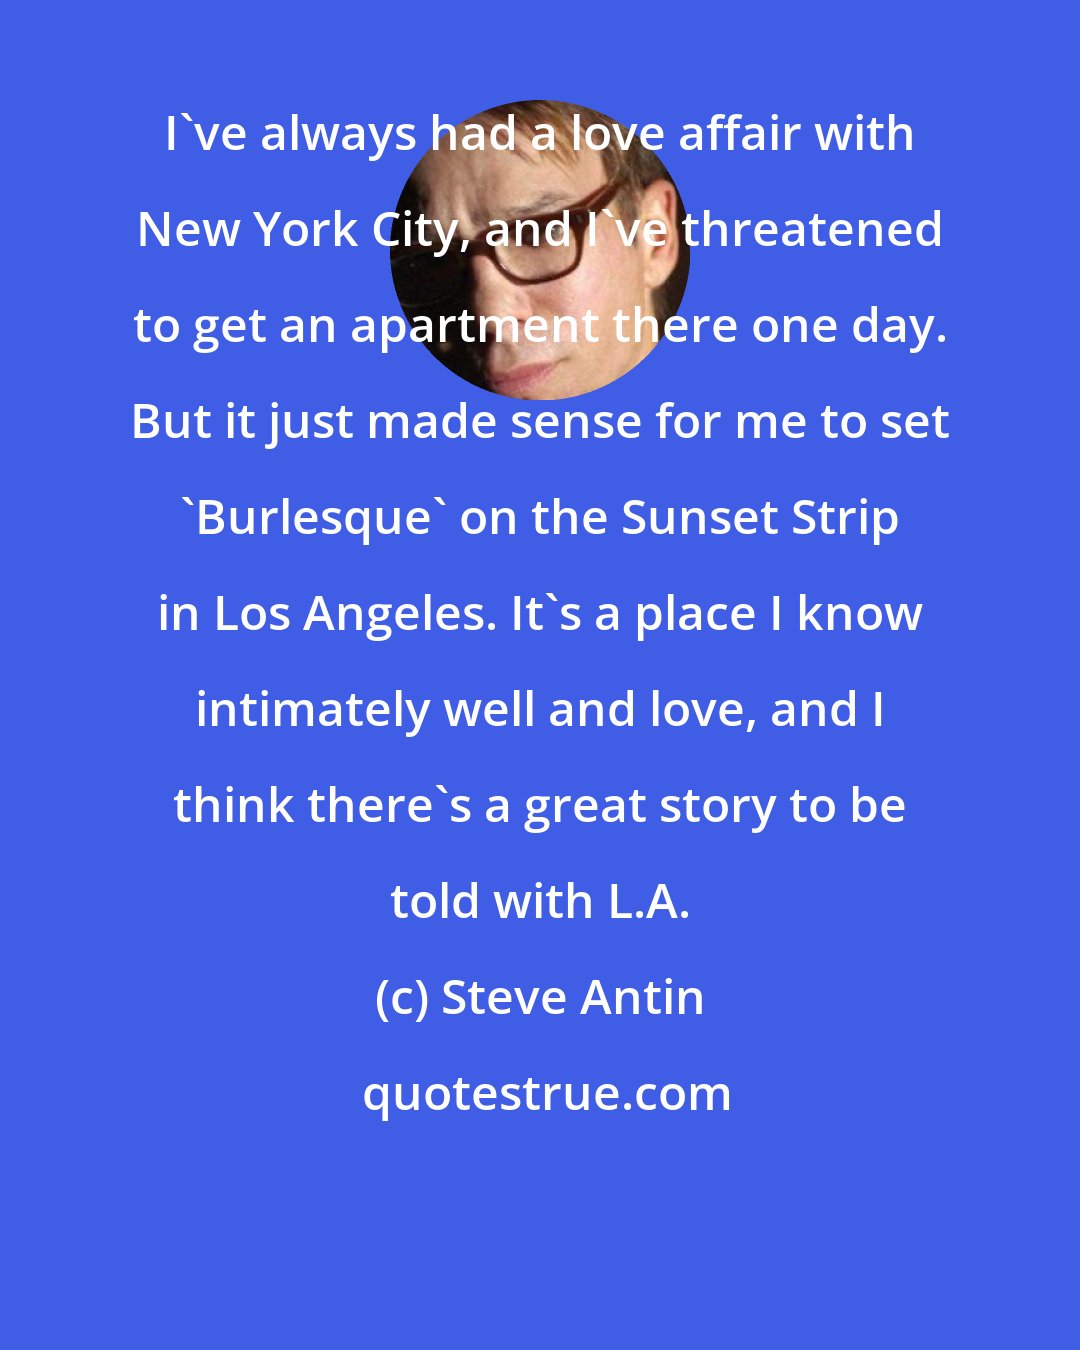 Steve Antin: I've always had a love affair with New York City, and I've threatened to get an apartment there one day. But it just made sense for me to set 'Burlesque' on the Sunset Strip in Los Angeles. It's a place I know intimately well and love, and I think there's a great story to be told with L.A.